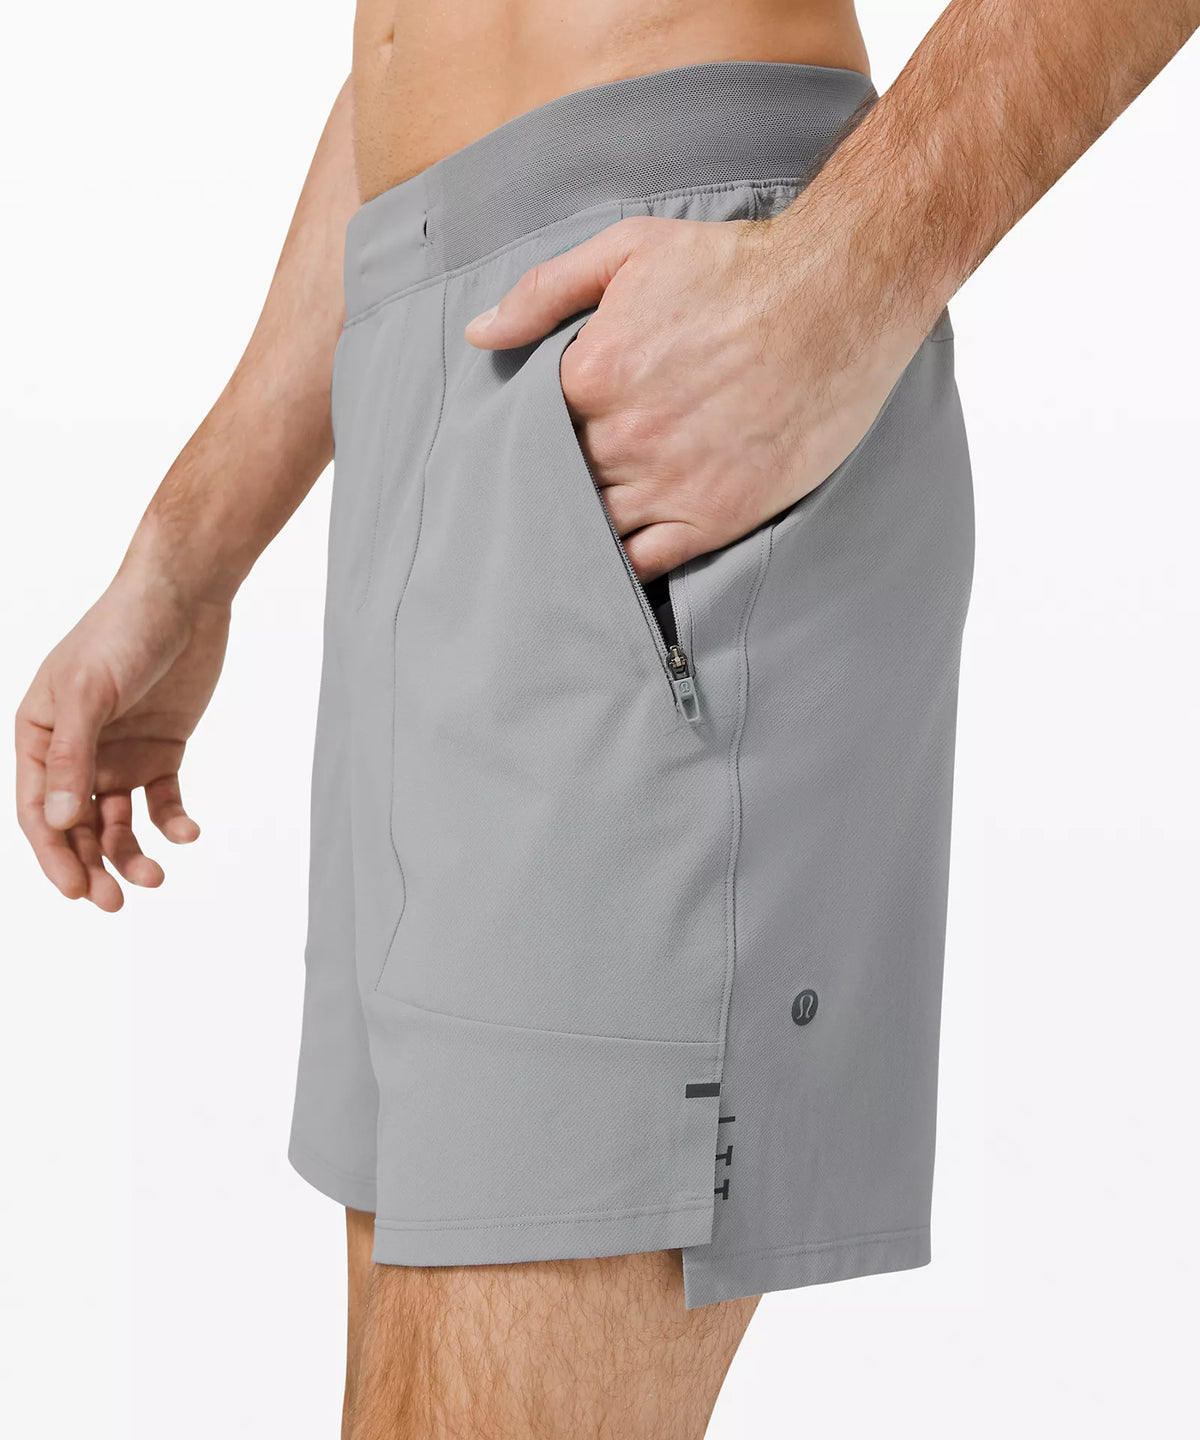 Review: Lululemon License To Train Shorts - Delta Grade